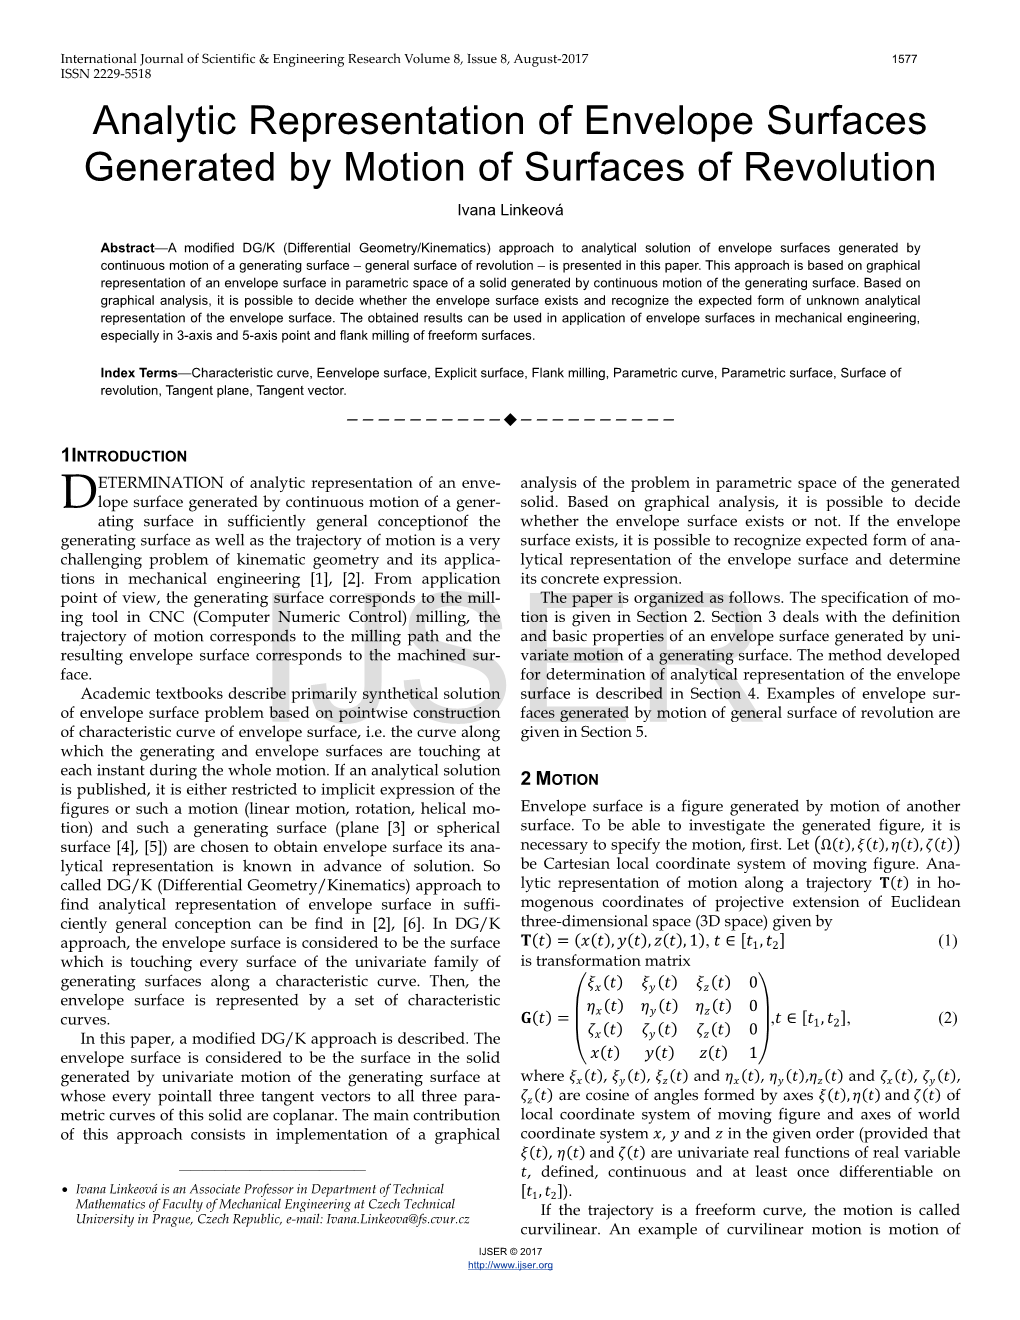 Analytic Representation of Envelope Surfaces Generated by Motion of Surfaces of Revolution Ivana Linkeová